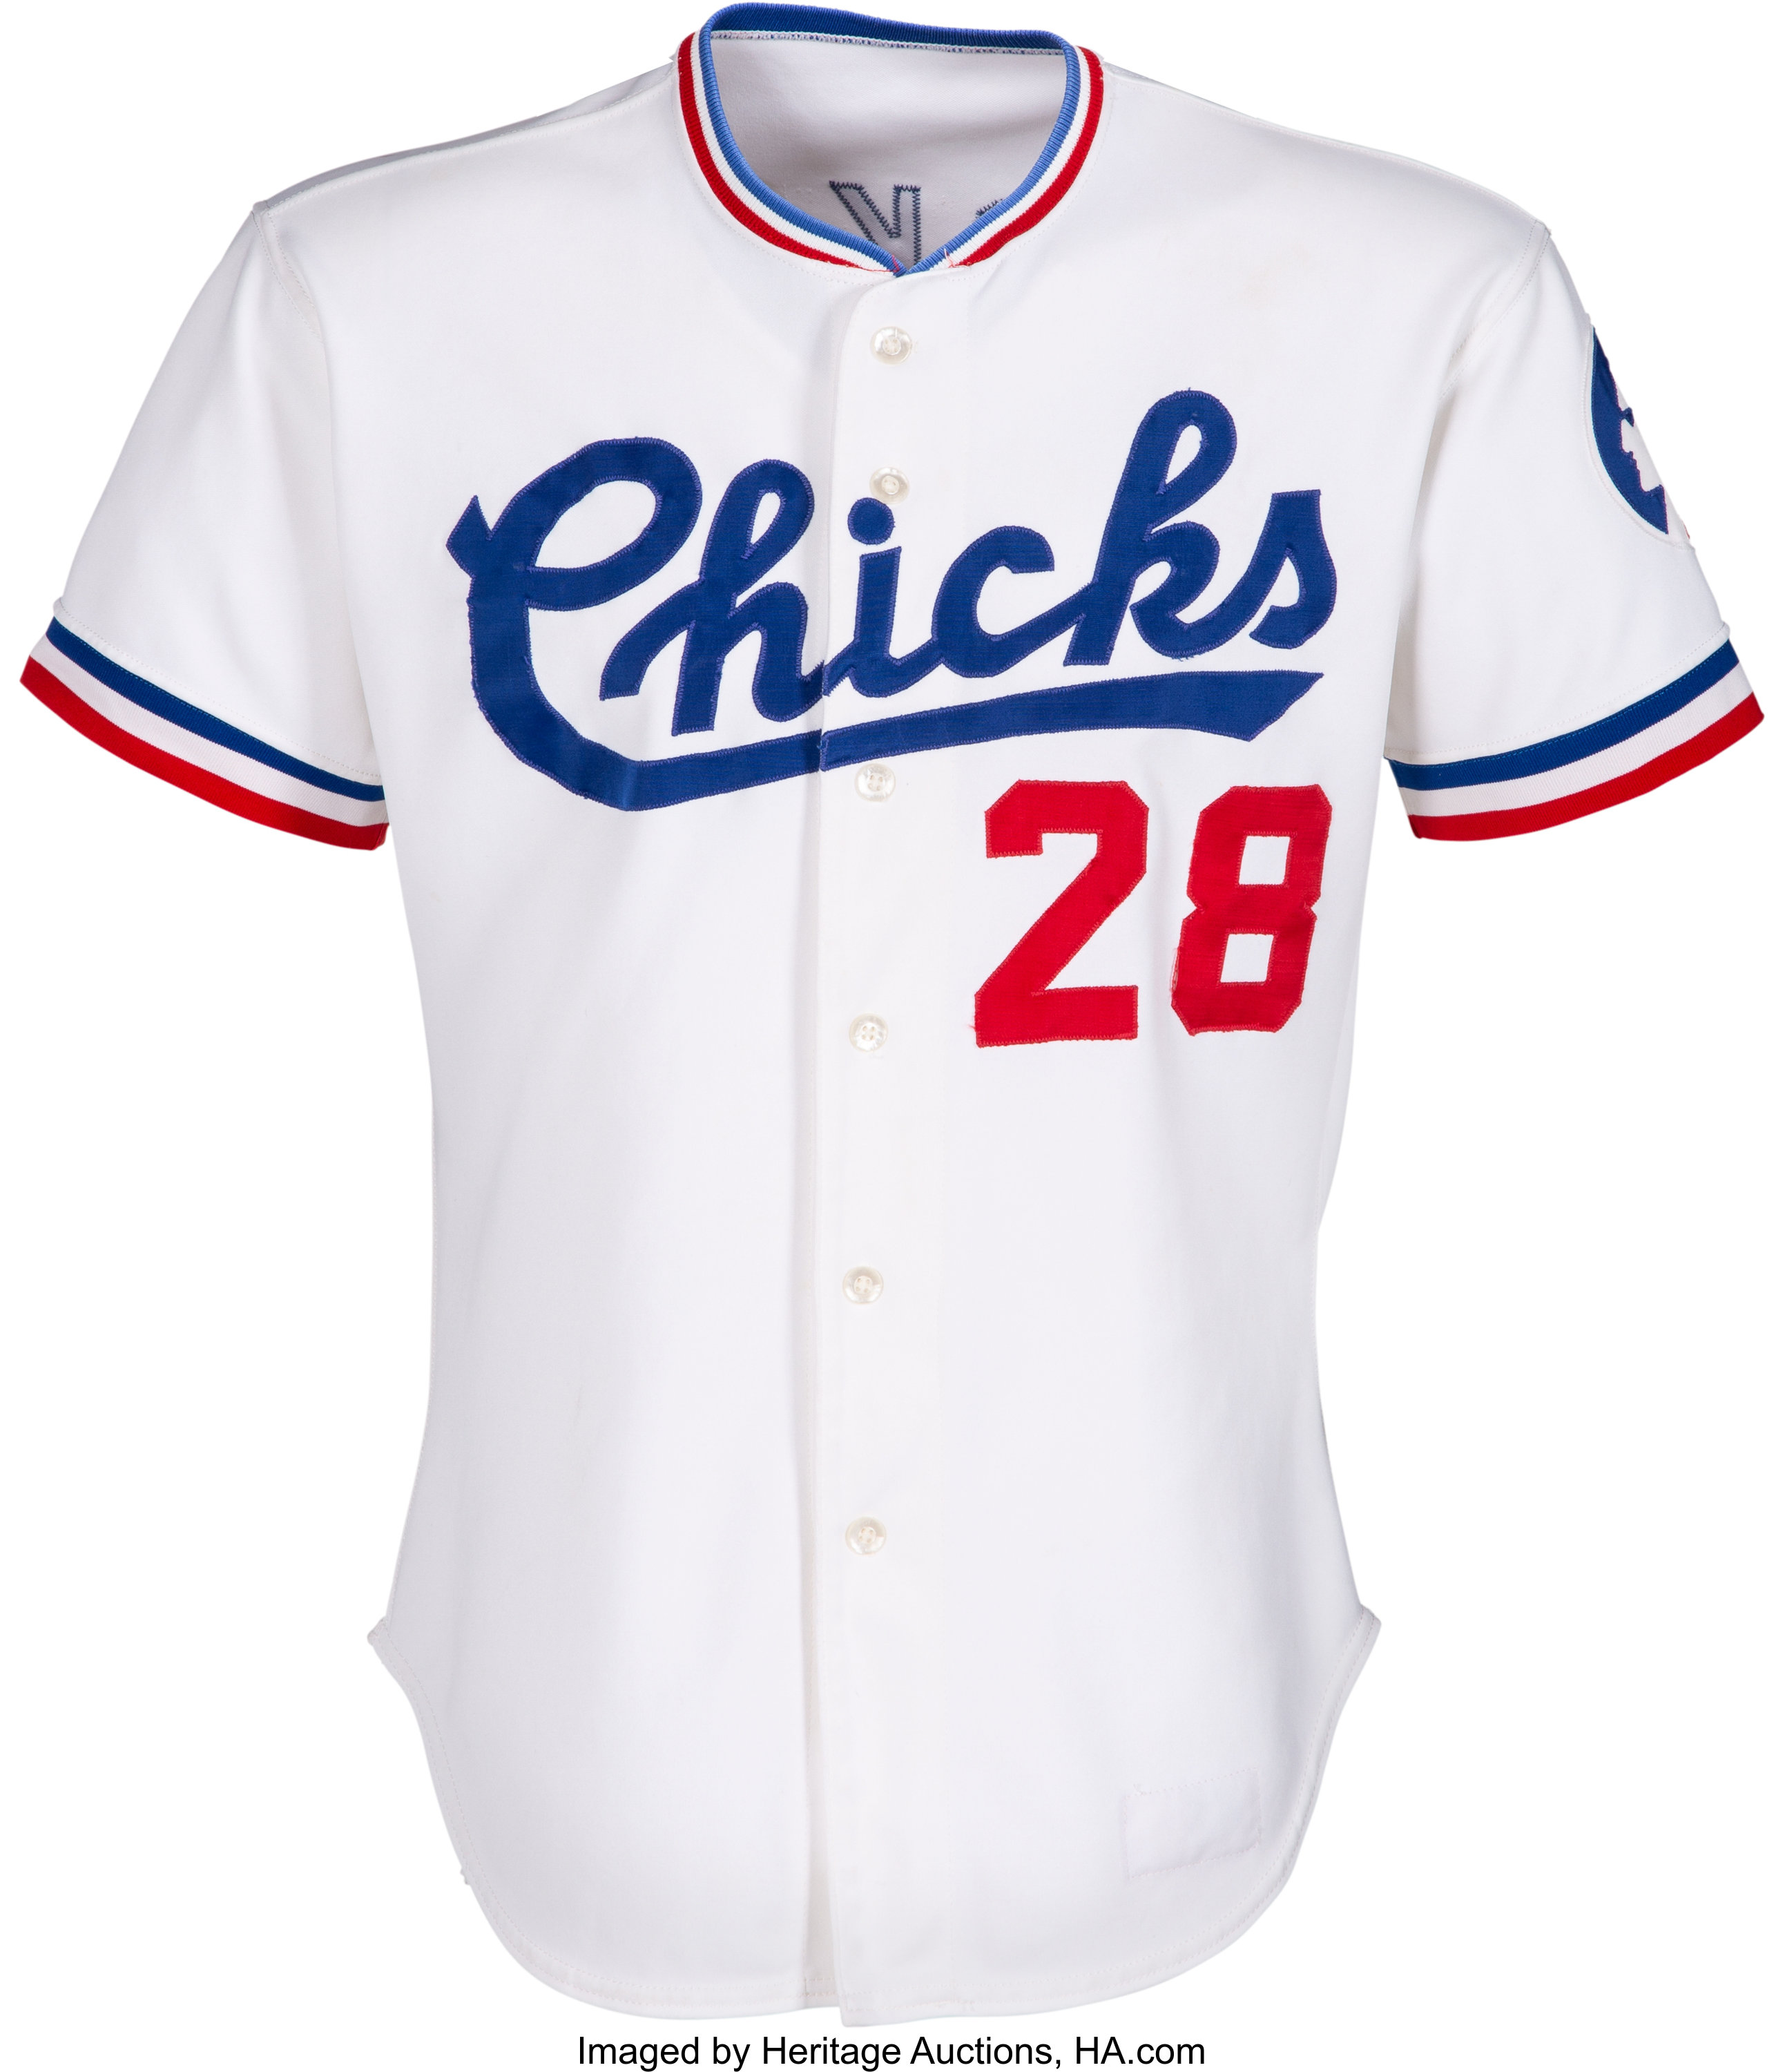 1944 Replica Memphis Chicks Home Pinstriped Baseball Jersey Includes Patches